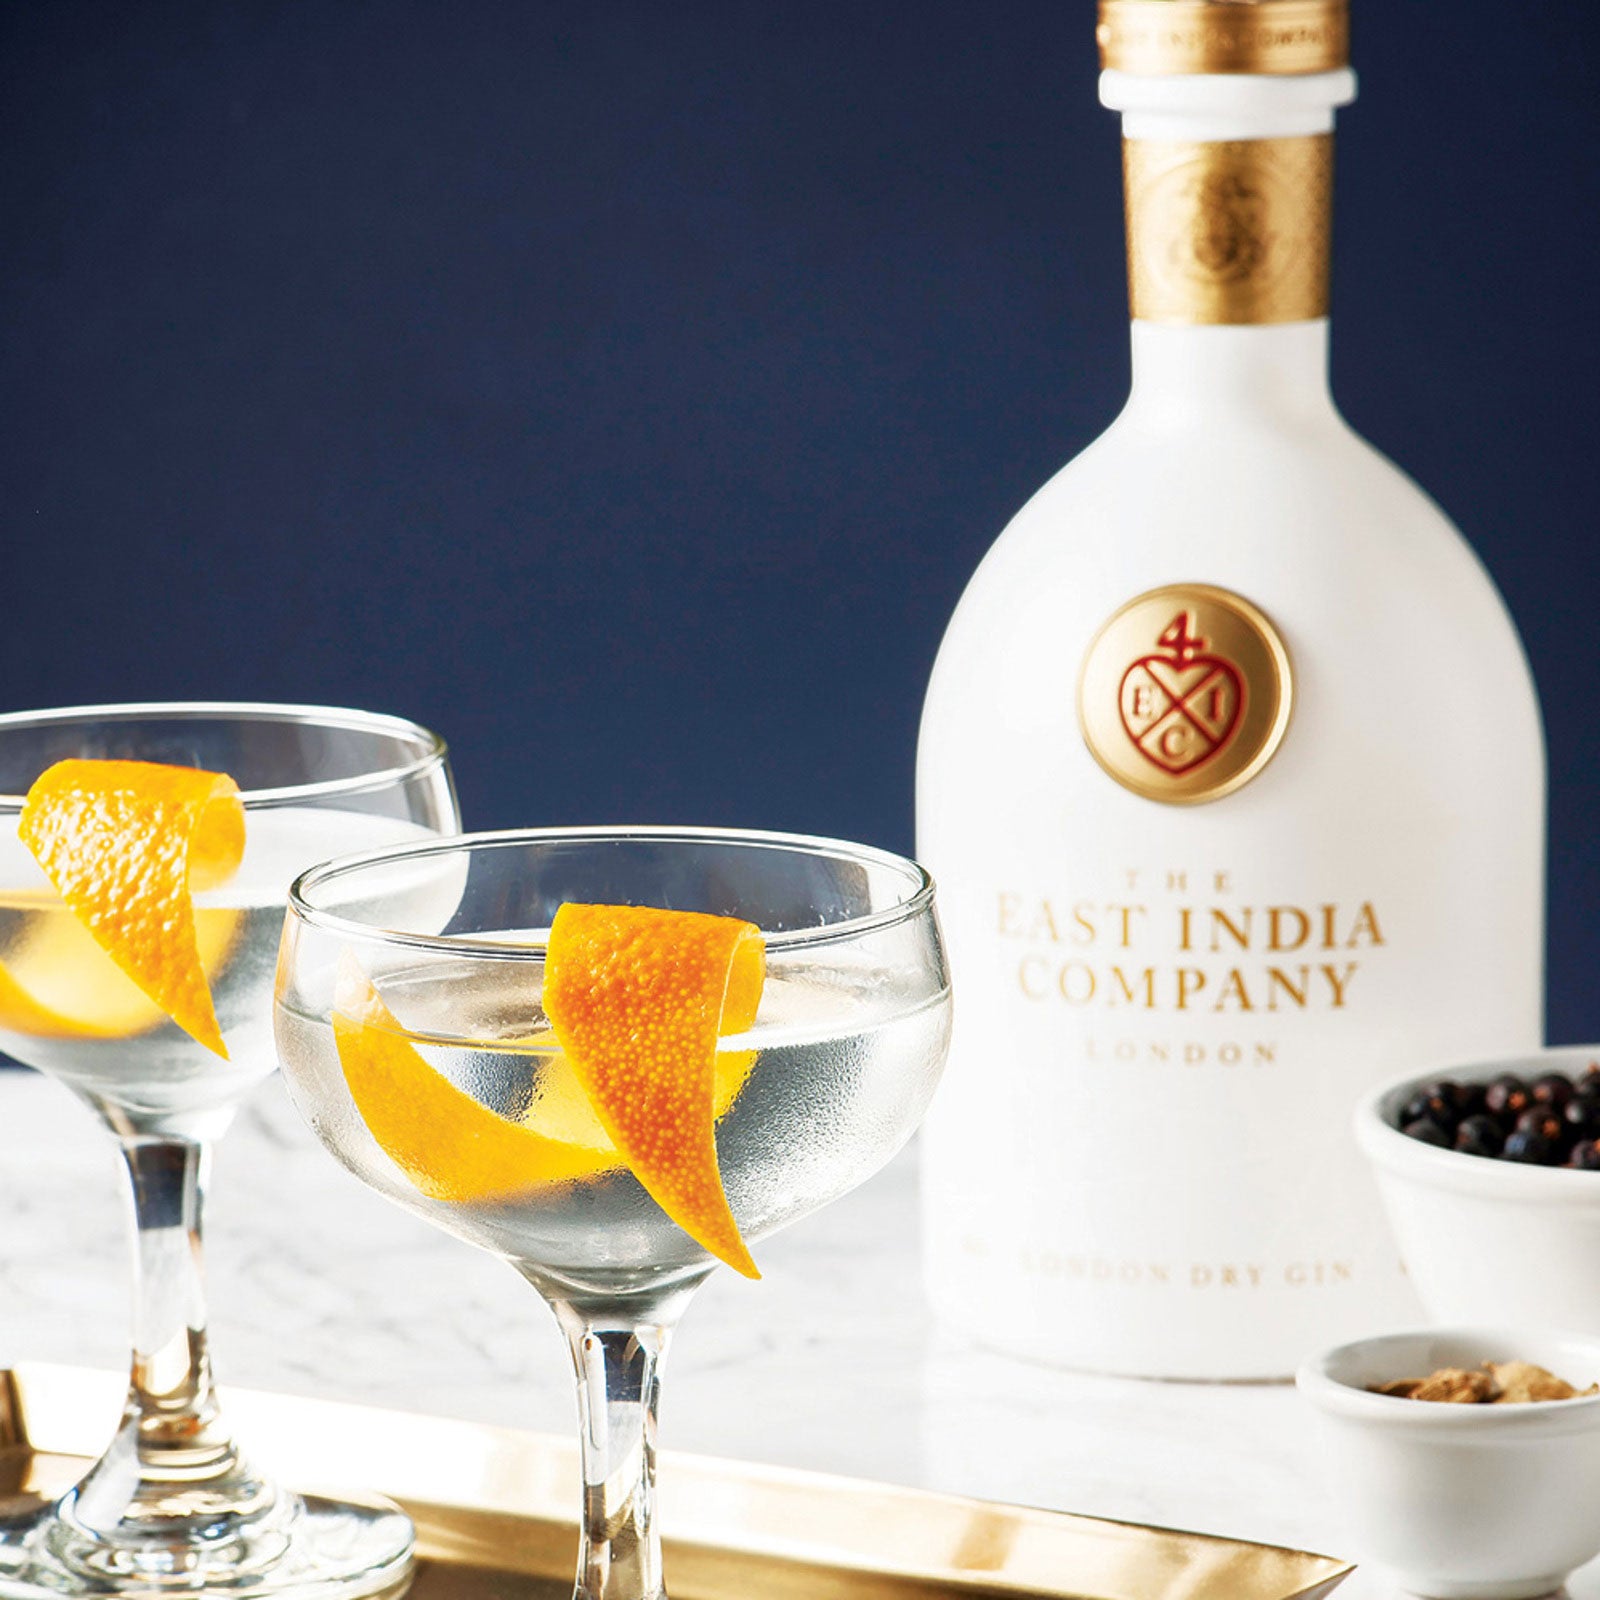 The East India Company London Dry Gin